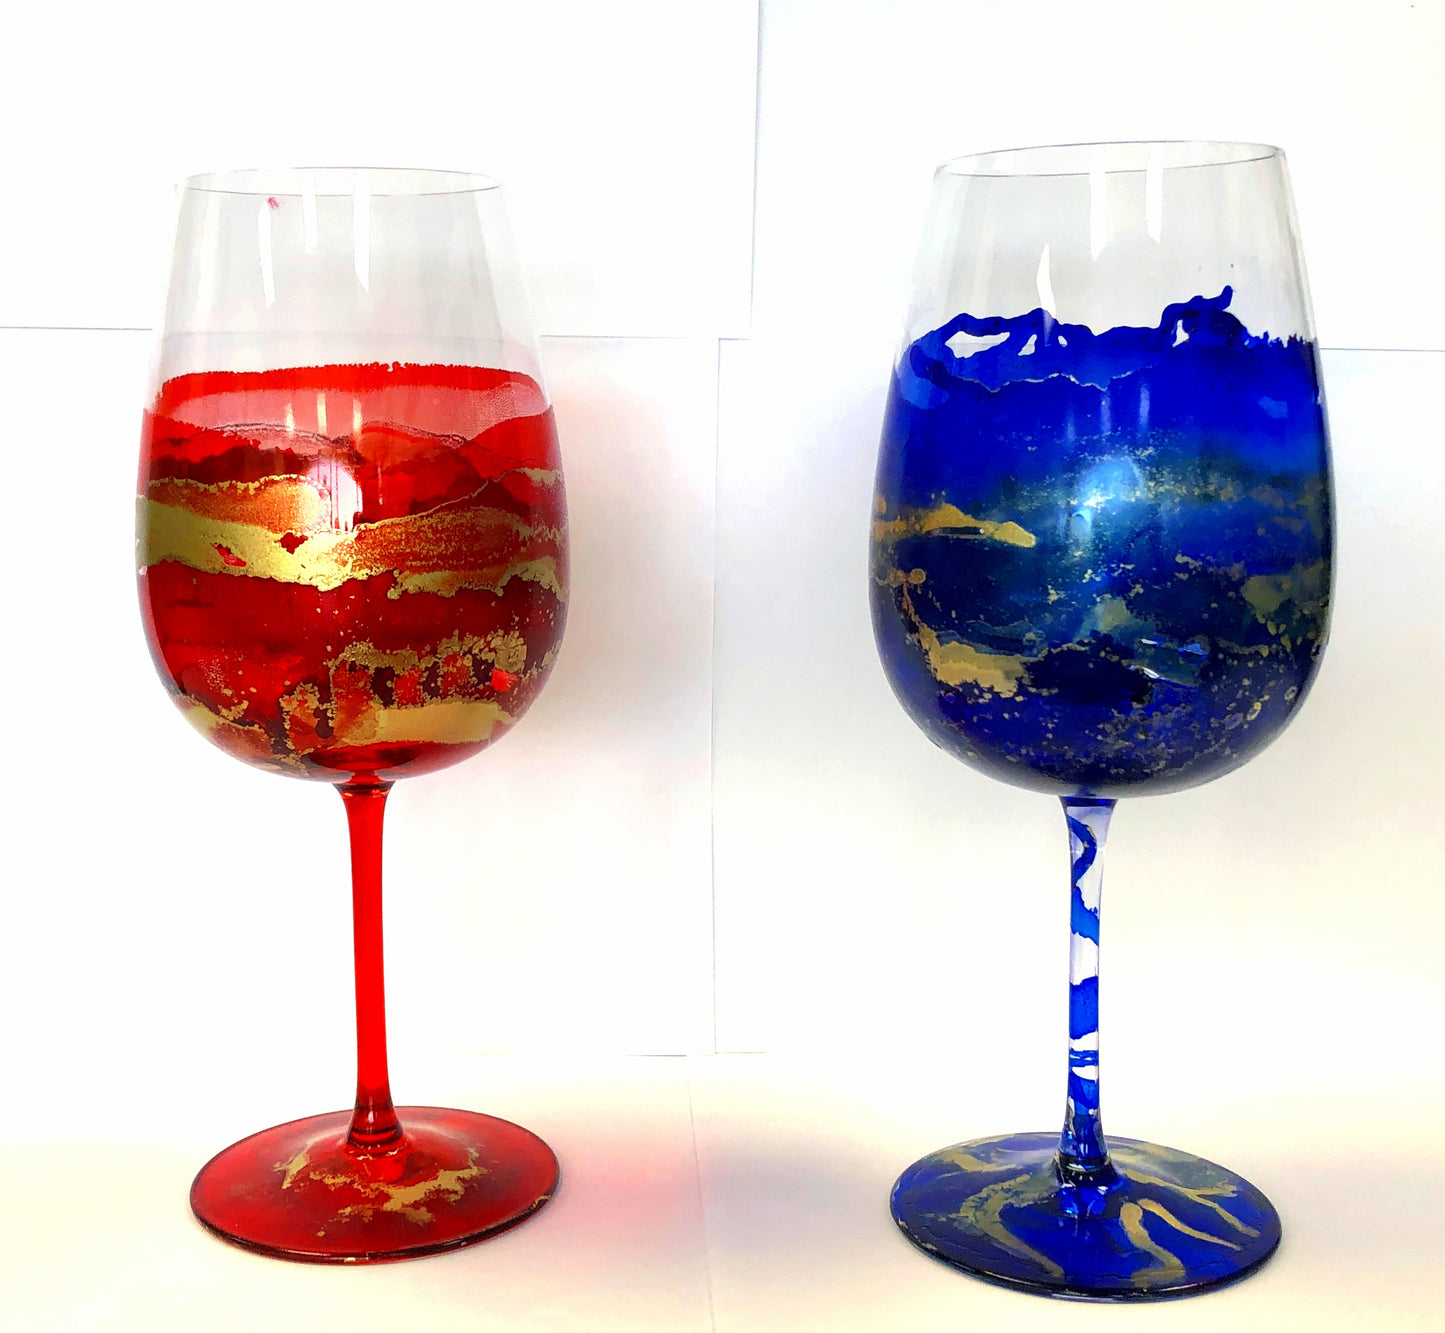 Thu, Apr 25th, 1230-230P "Painted Glass" Private Houston Corporate Painting Class